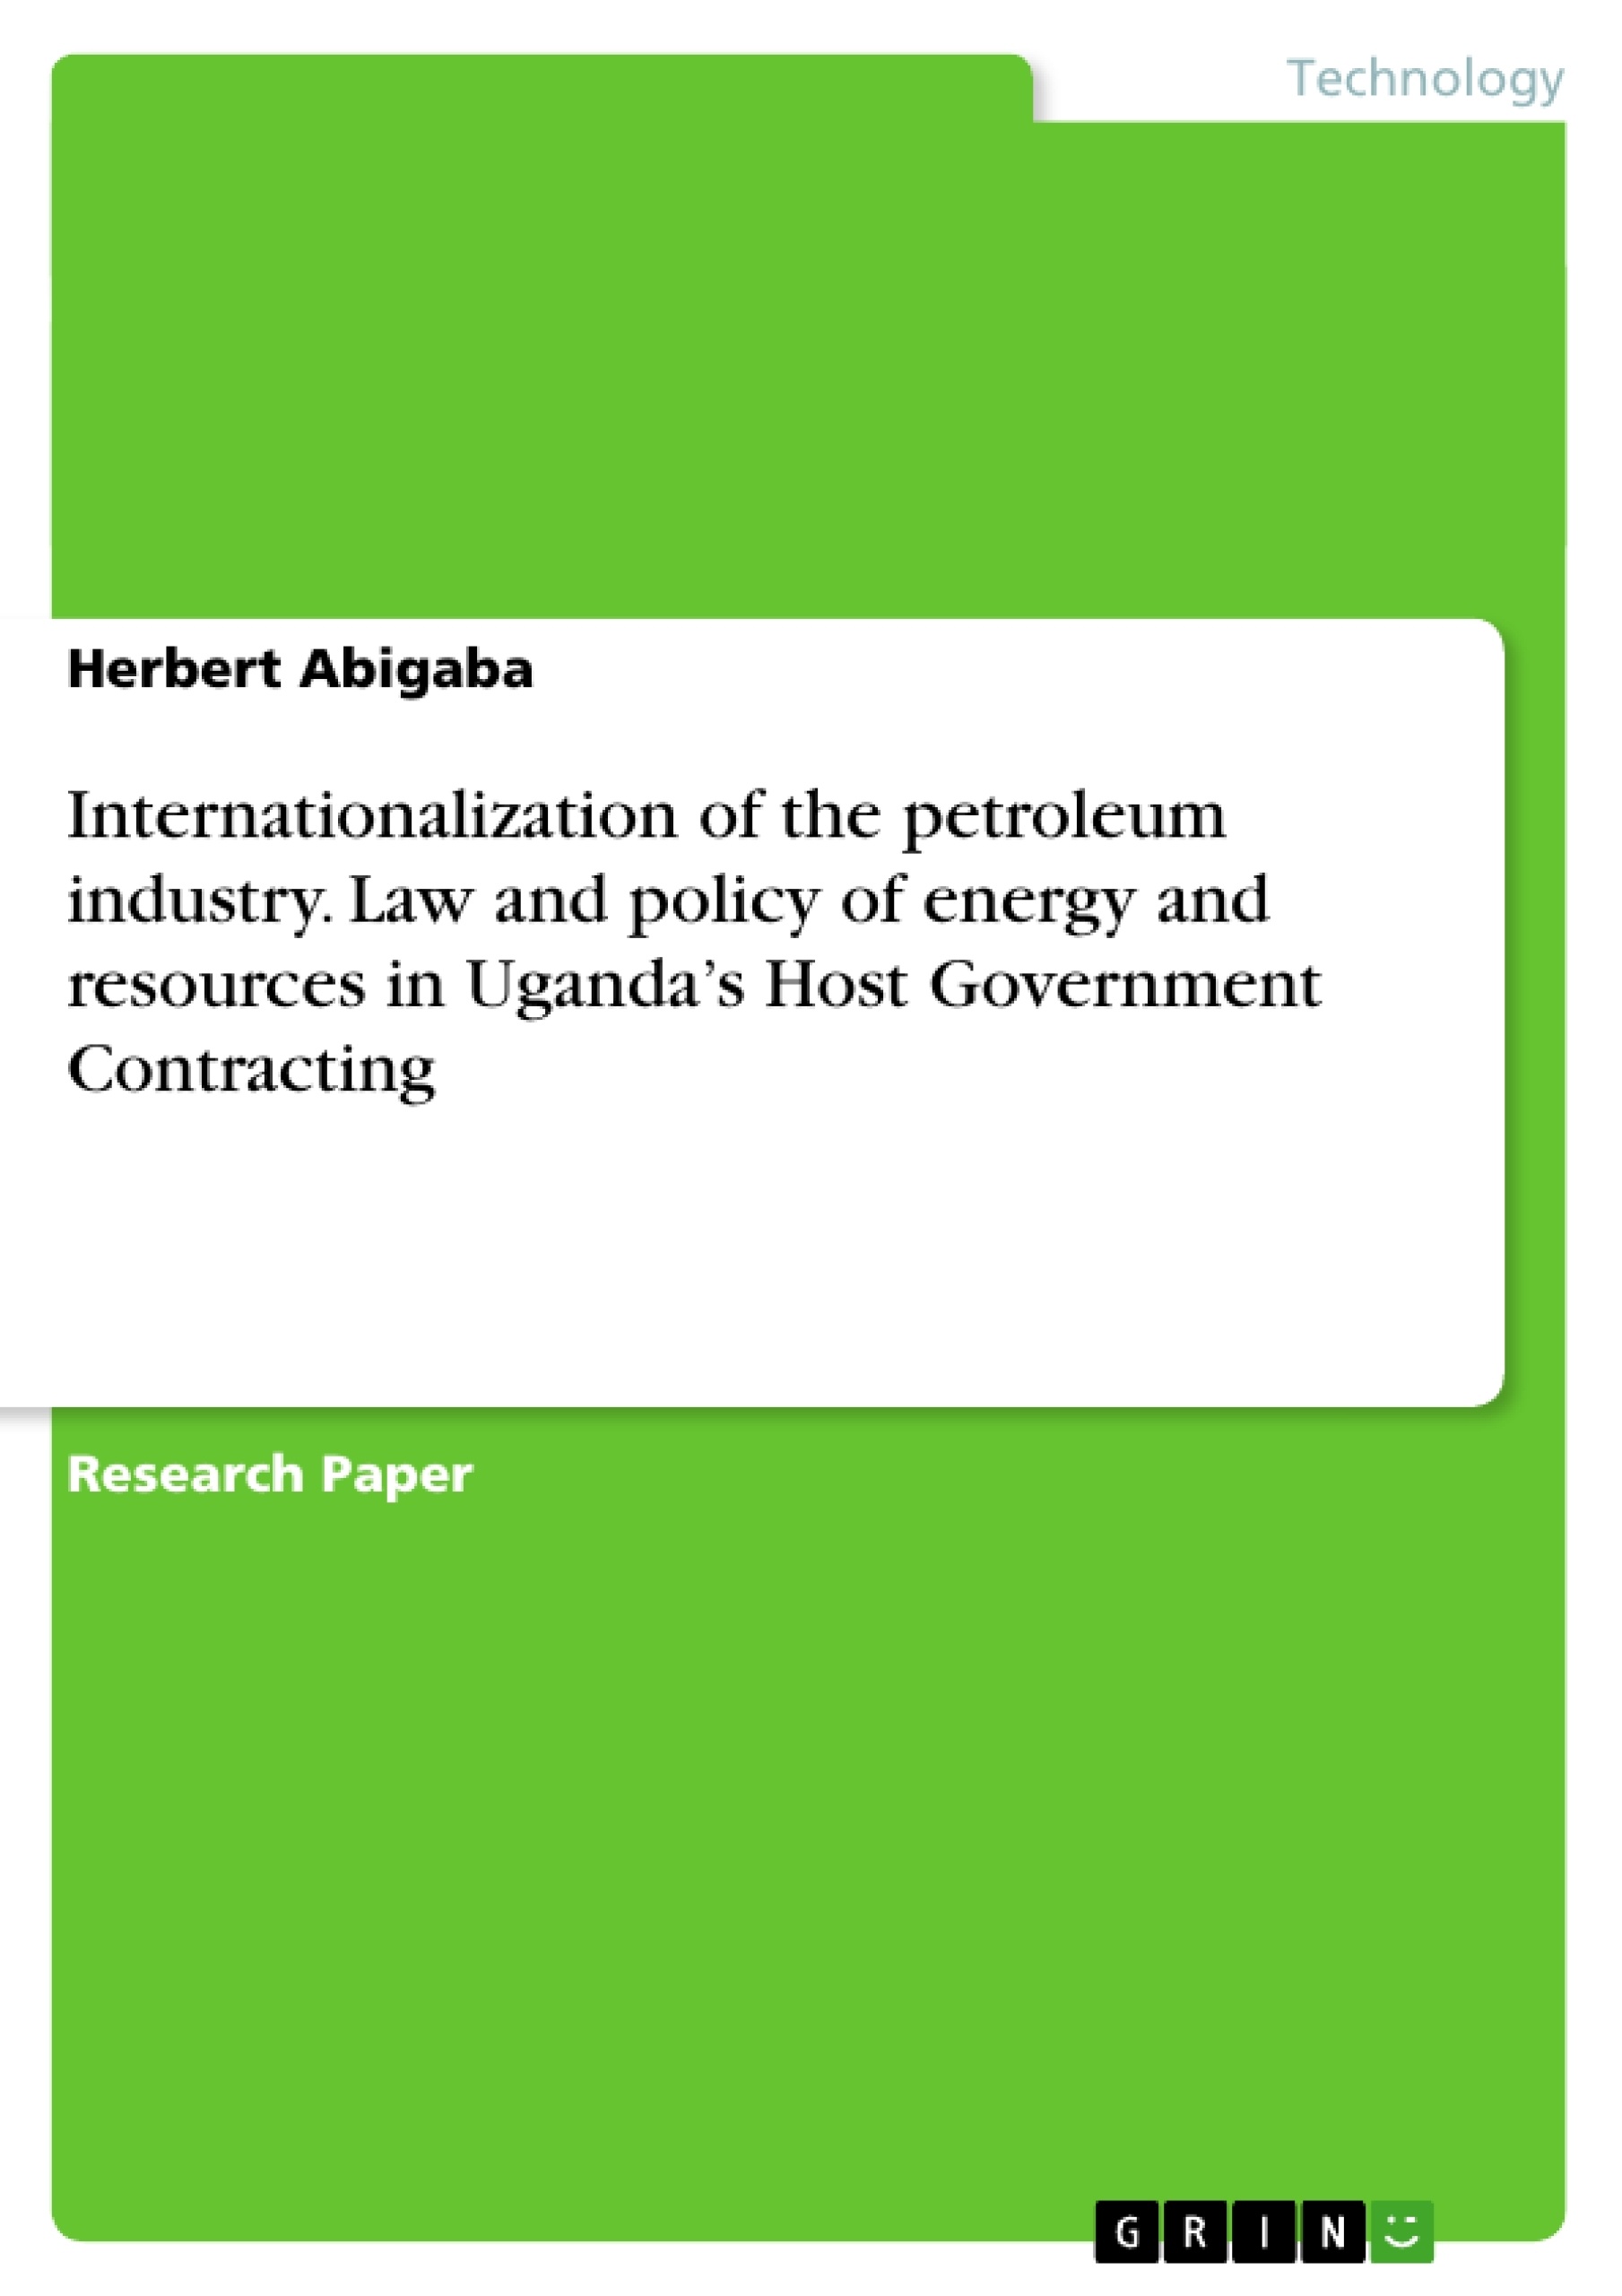 Titre: Internationalization of the petroleum industry. Law and policy of energy and resources in Uganda’s Host Government Contracting